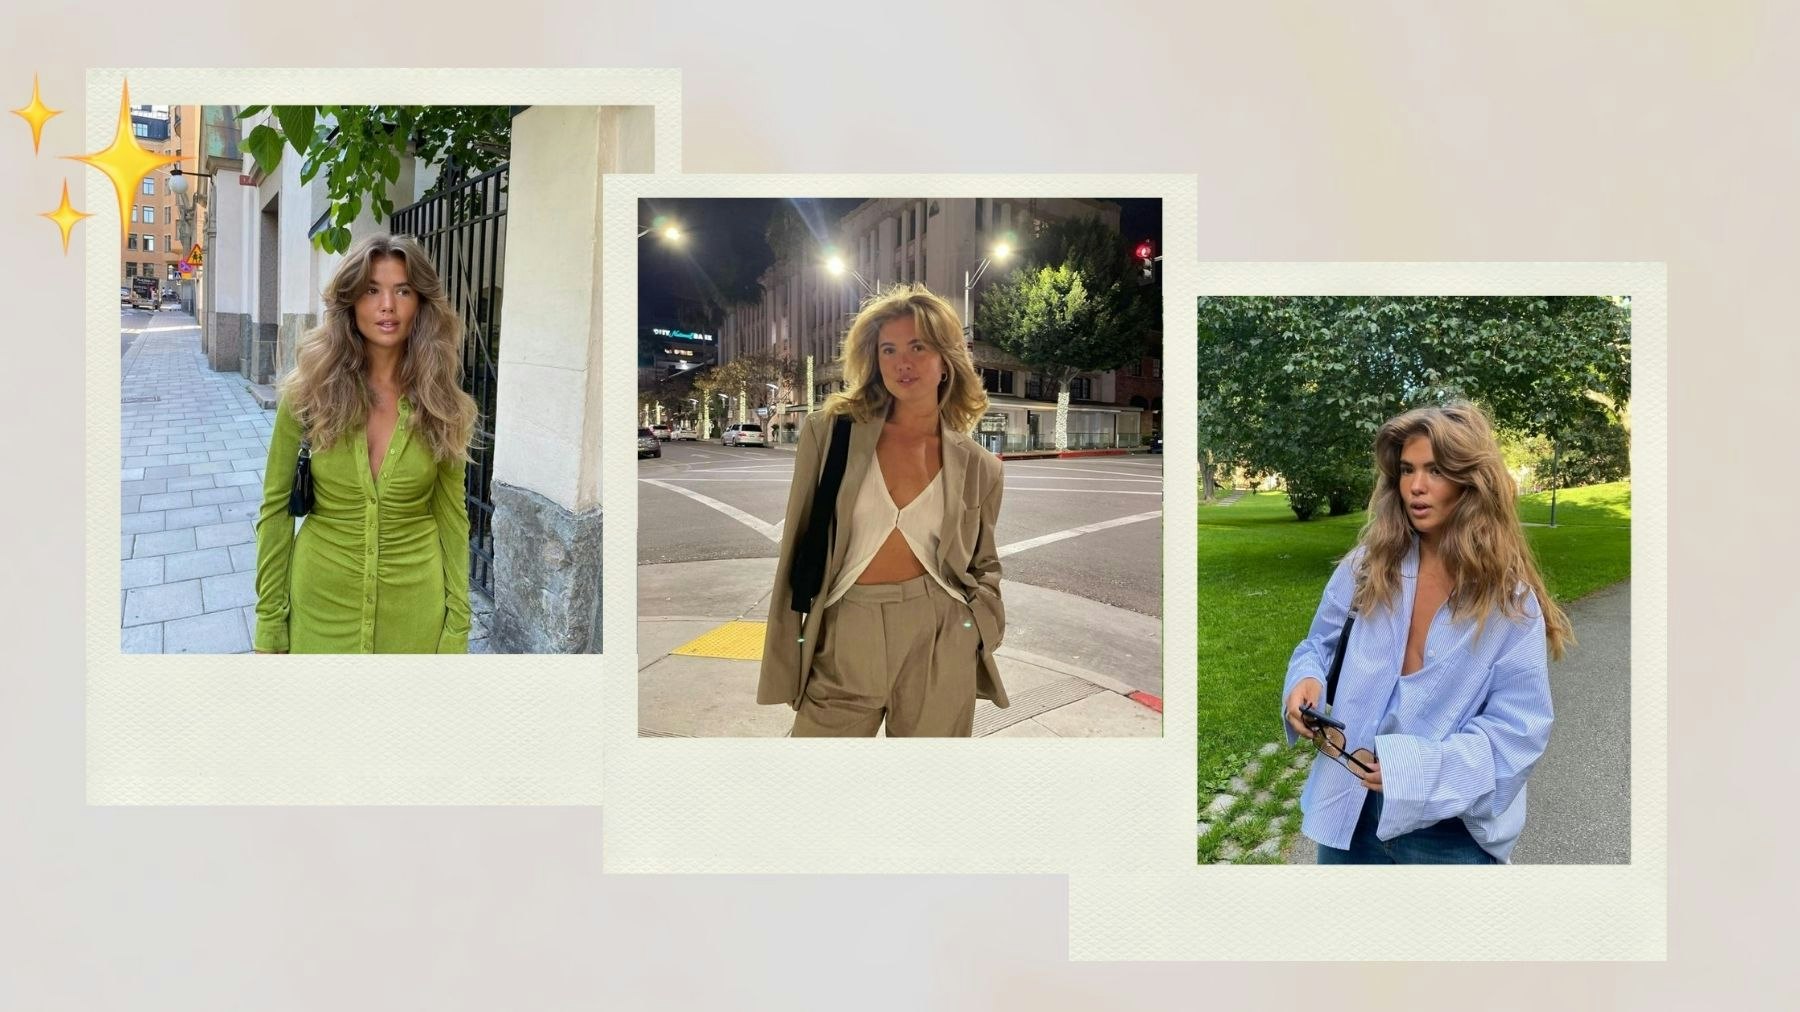 Matilda Djerf's Best Outfits And How To Recreate Them On The High